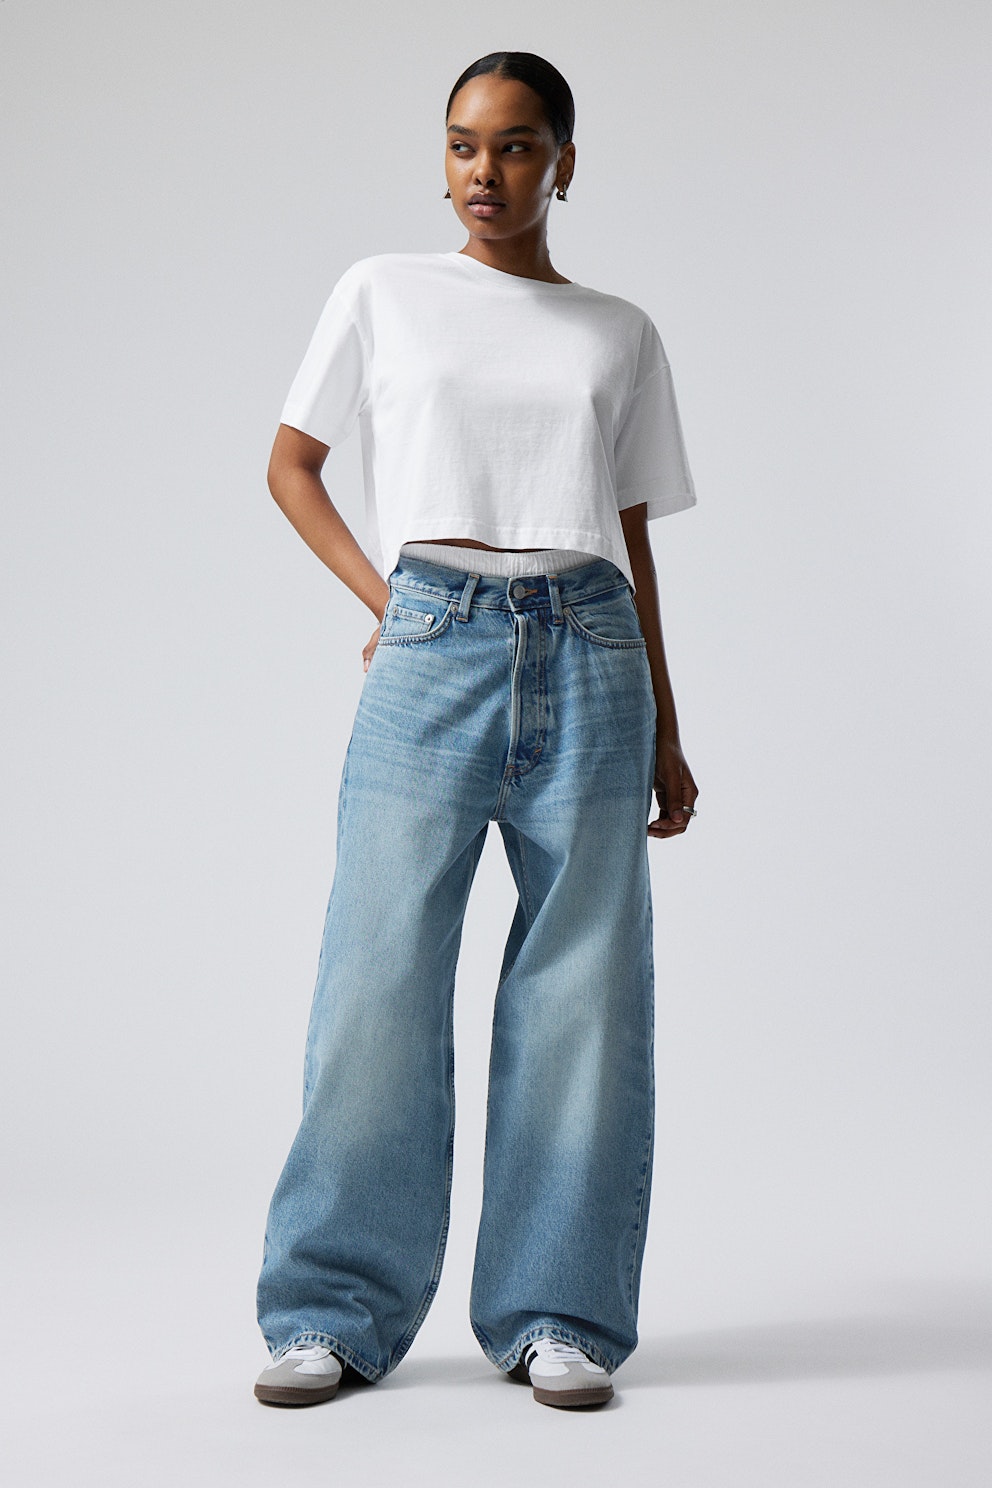 Weekday's £56 Jeans Are The Most Popular Pair In The World Right Now